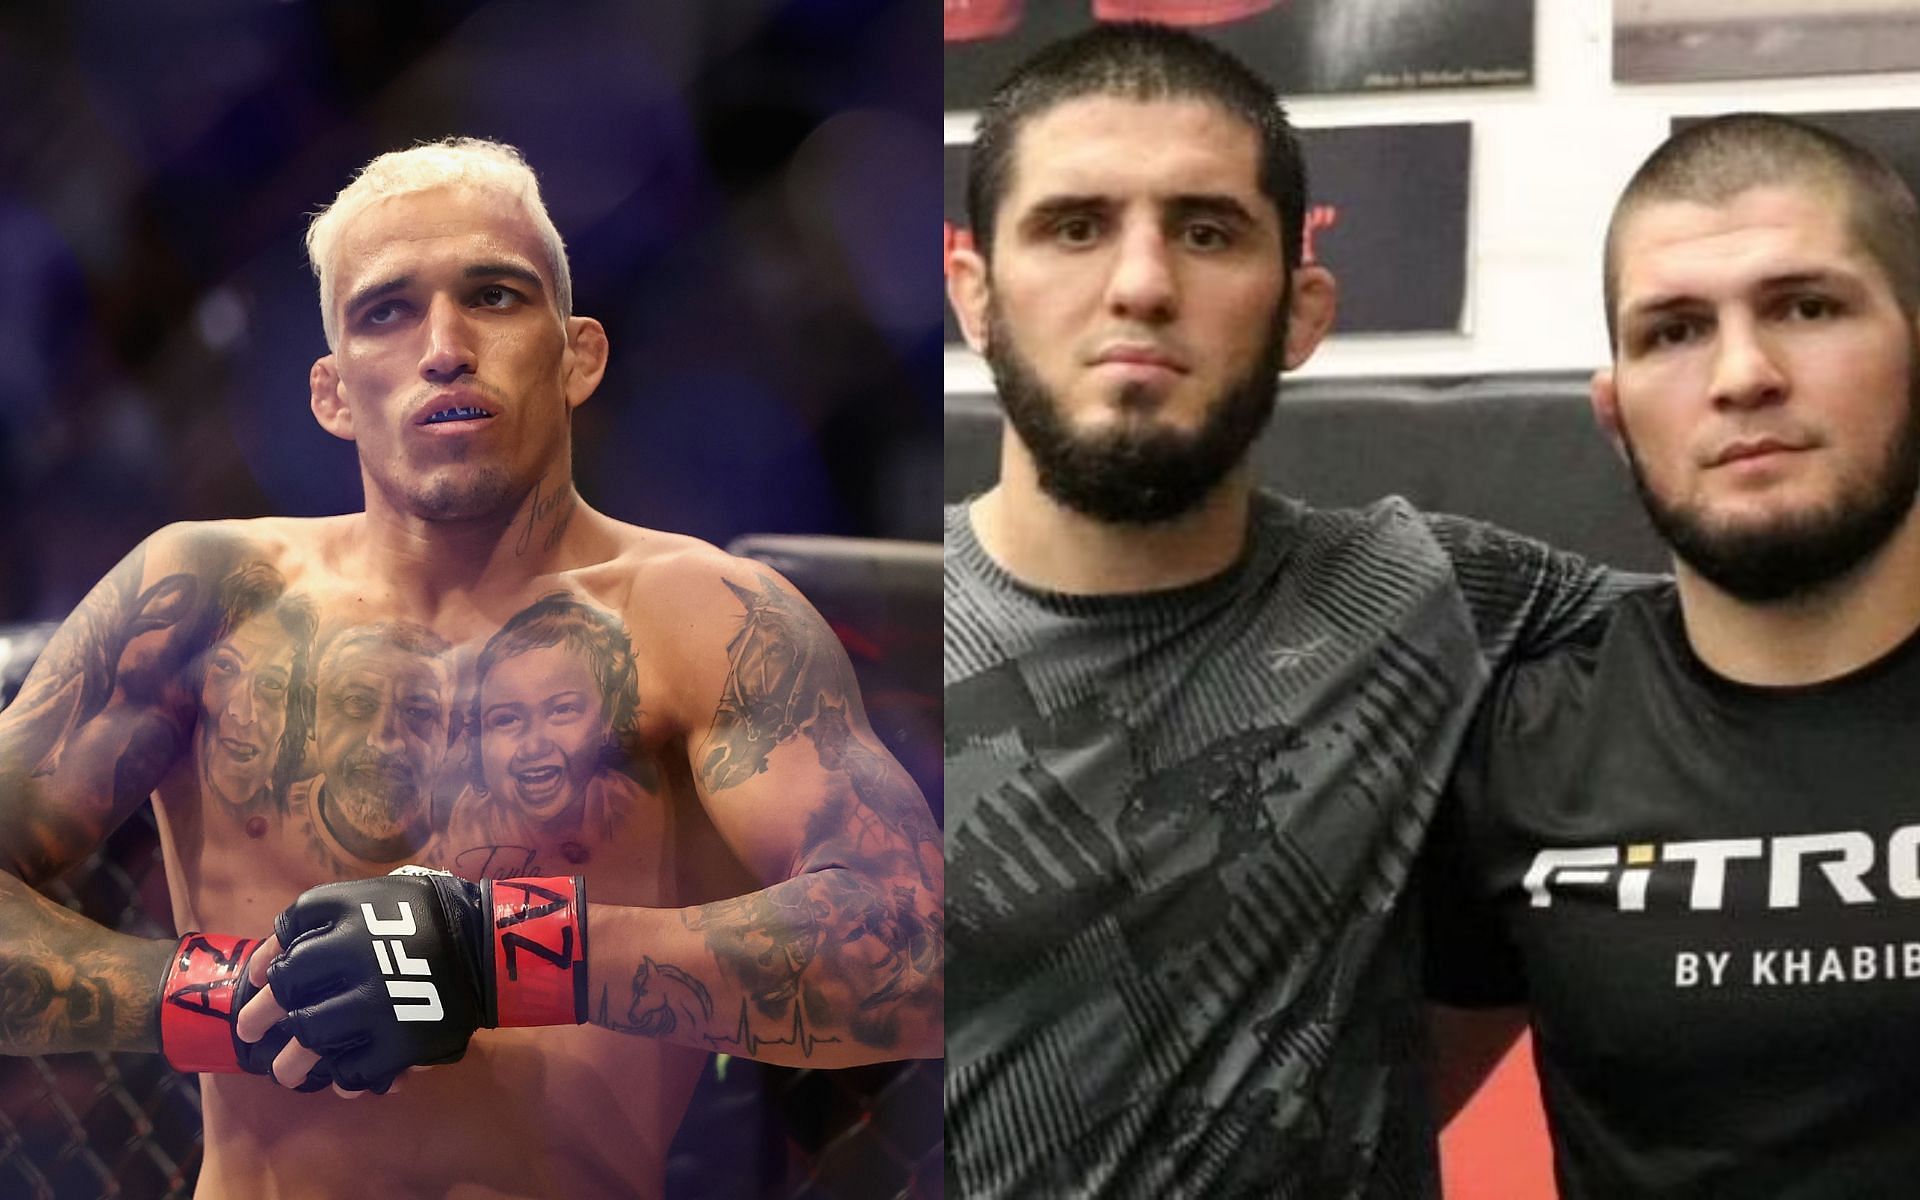 Charles Oliveira (L) opened up on why he branded Islam Makhachev (C) and his team as arrogant [Image credits: Getty and @khabib_nurmagomedov on Instagram]